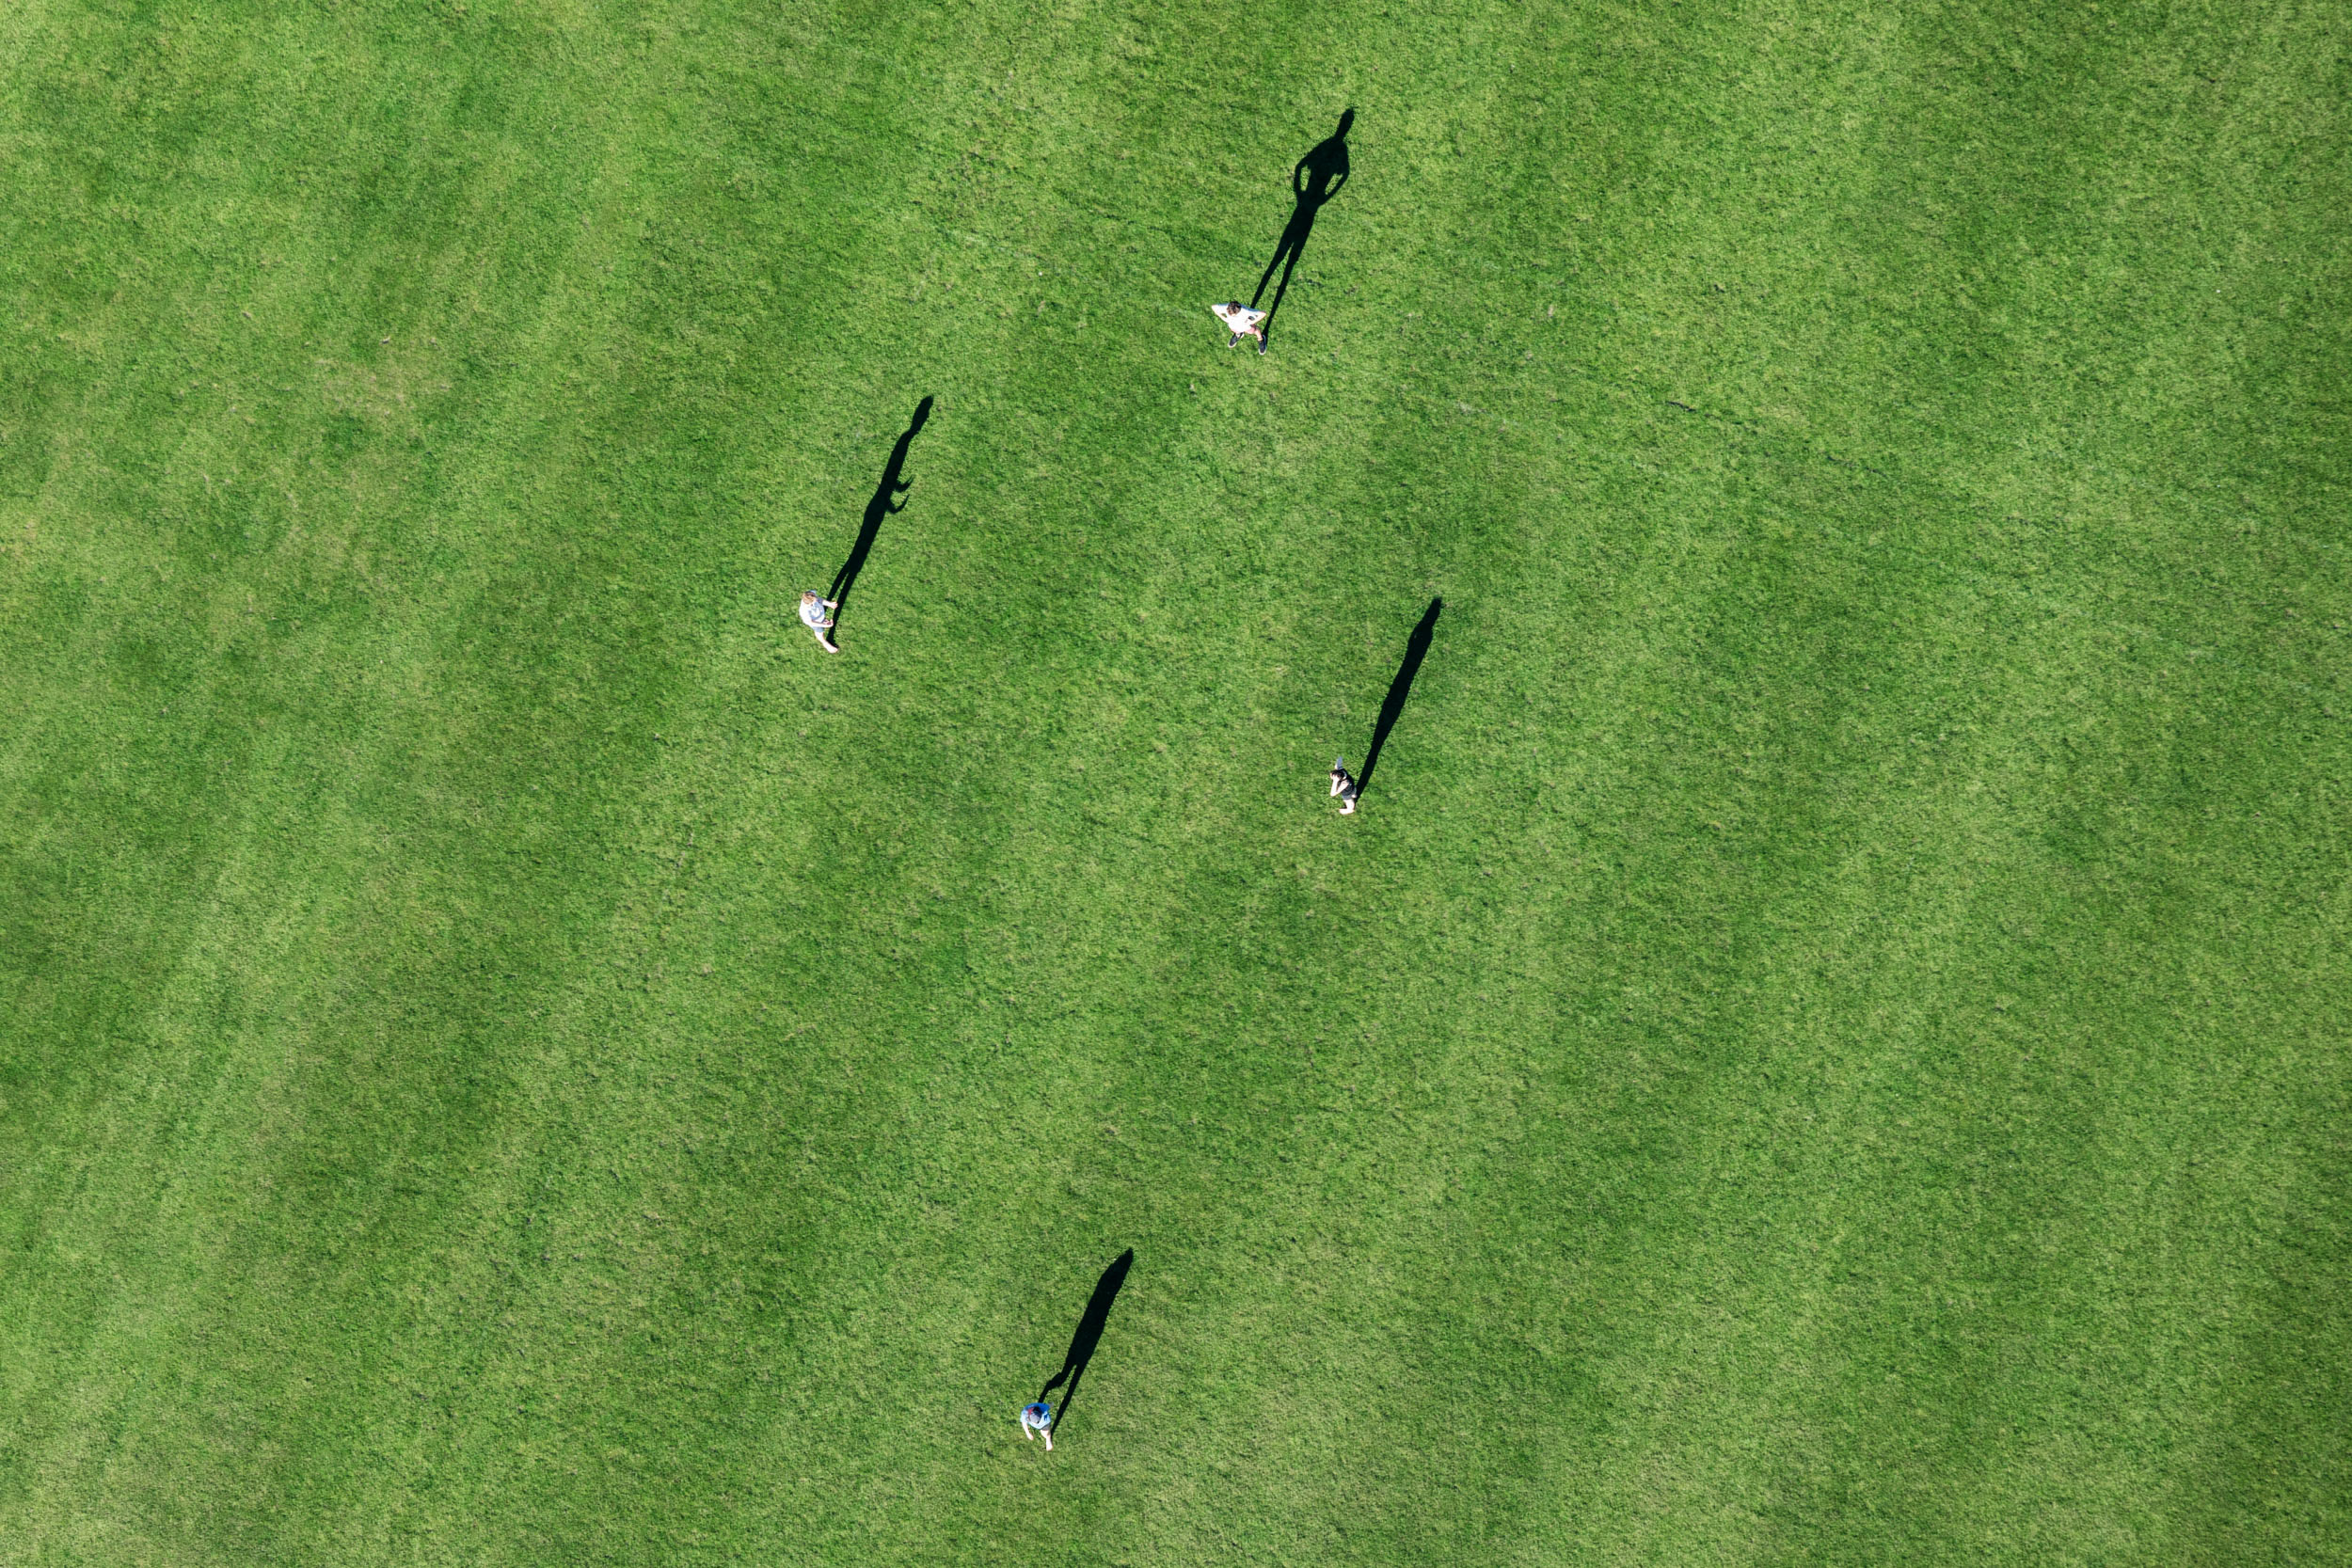 Soccer practice from above